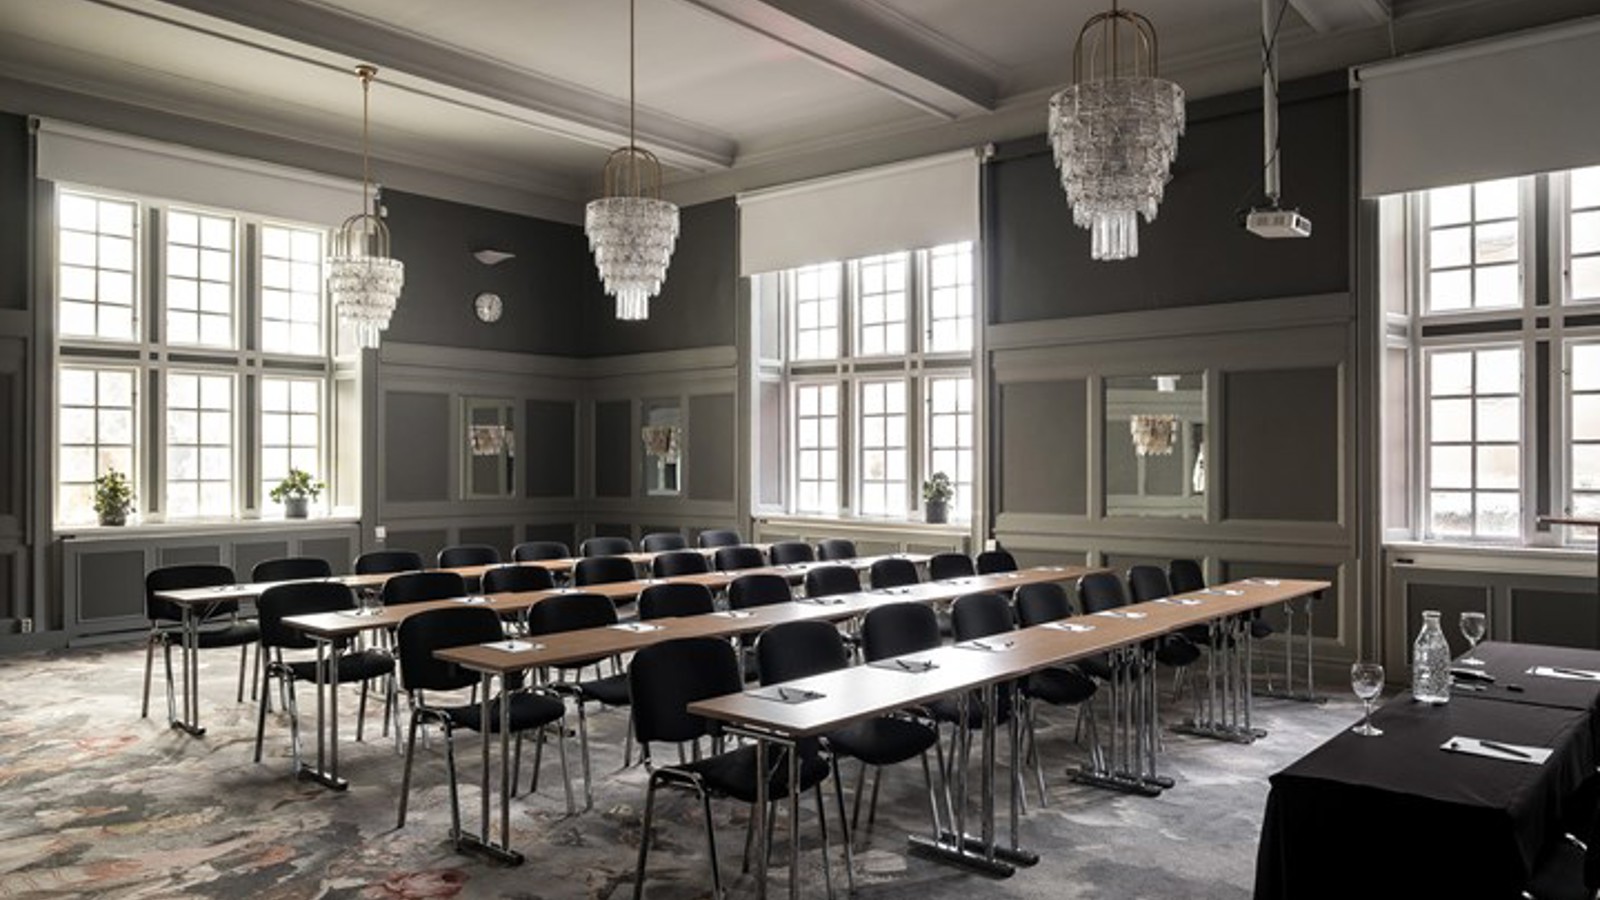 Conference room with school seating, large windows and crystal chandeliers